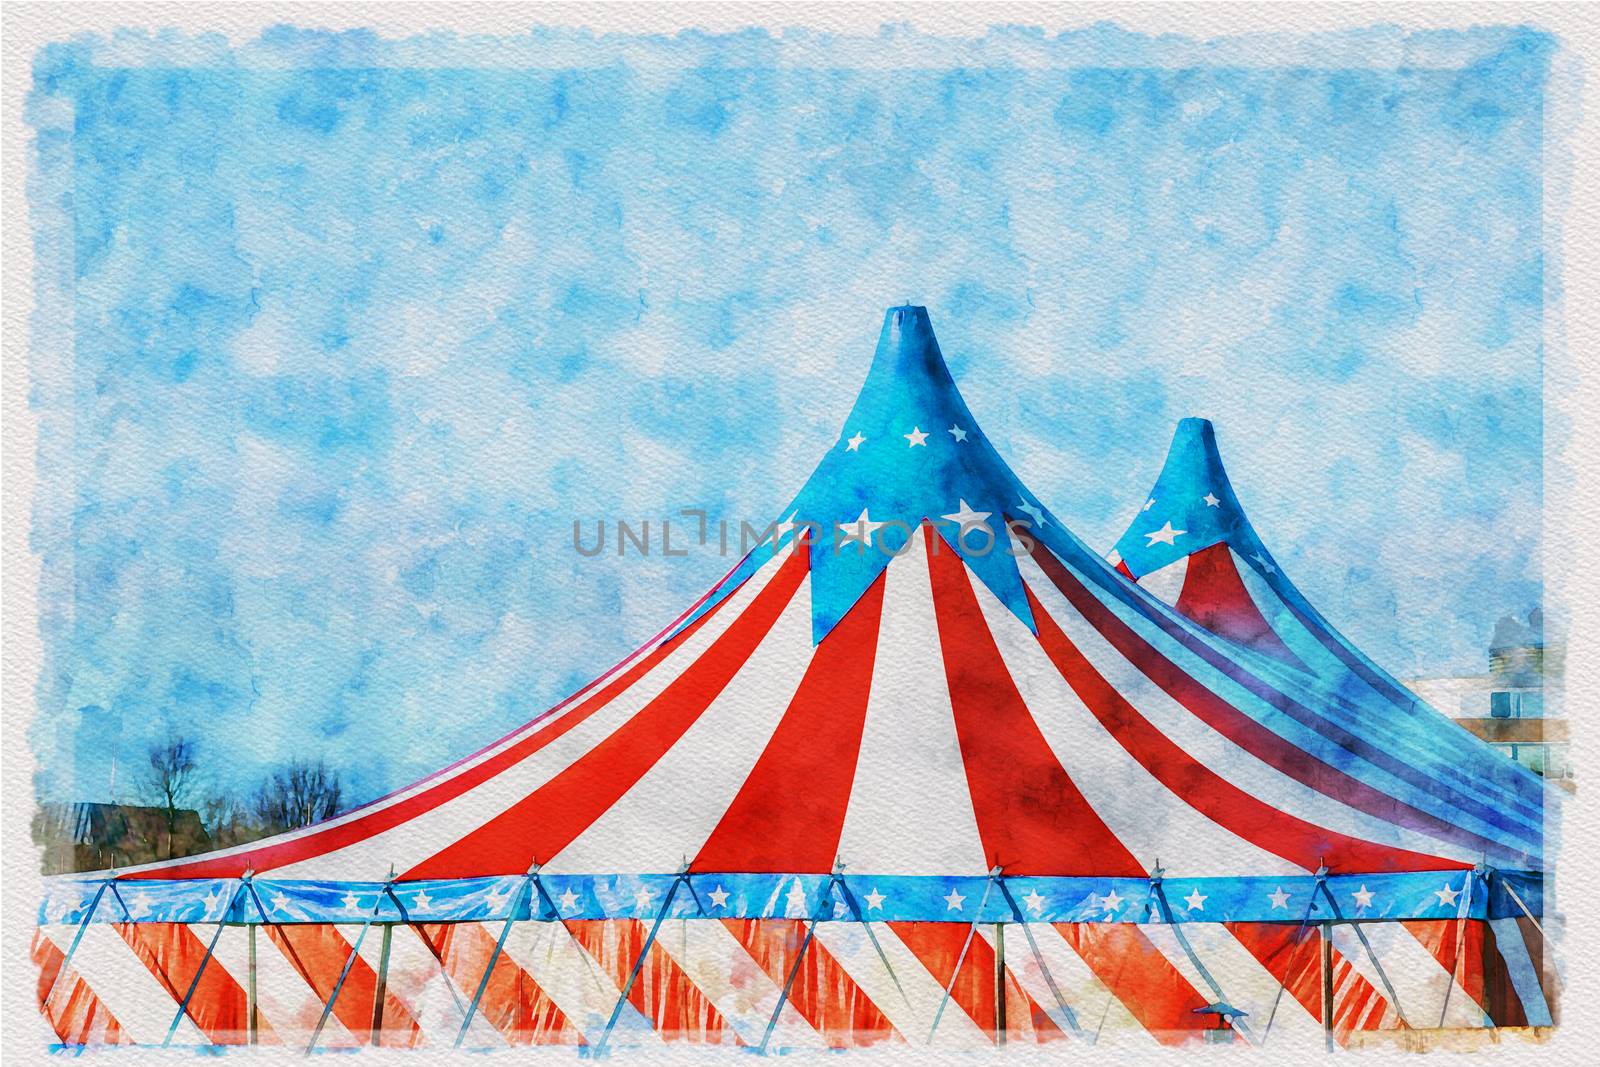 Digital watercolor painting red and white circus tent topped with bleu starred cover against a sunny blue sky with clouds